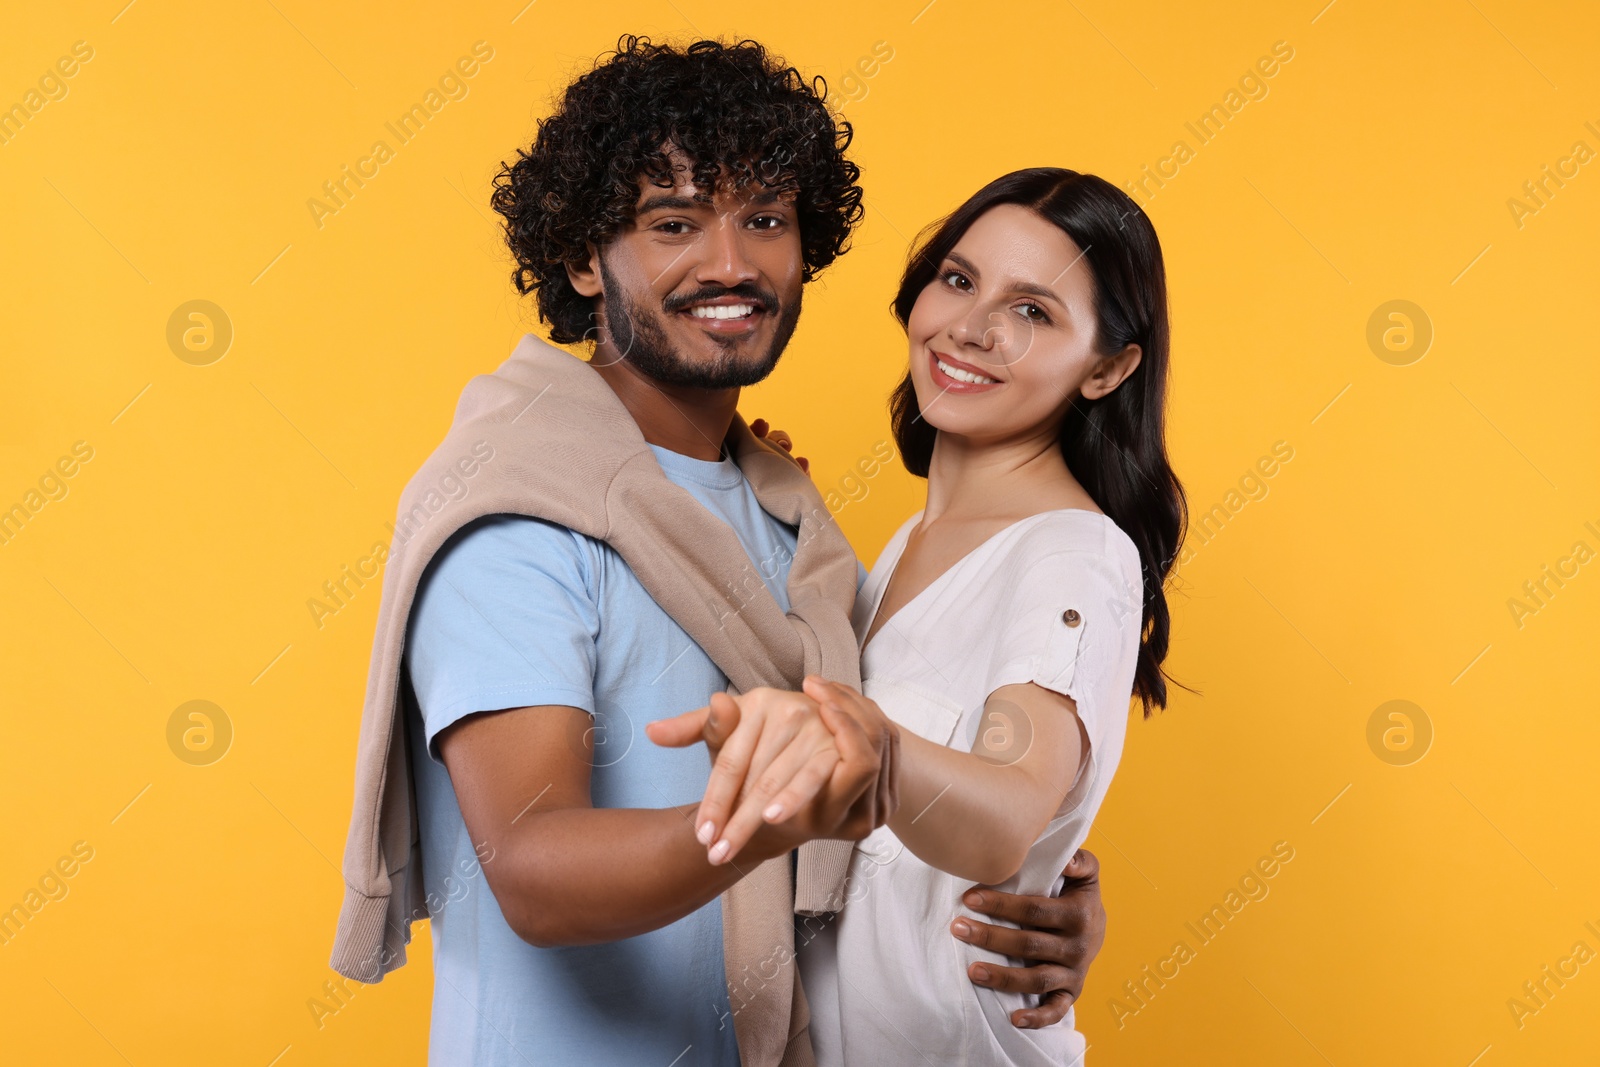 Photo of International dating. Happy couple dancing on yellow background